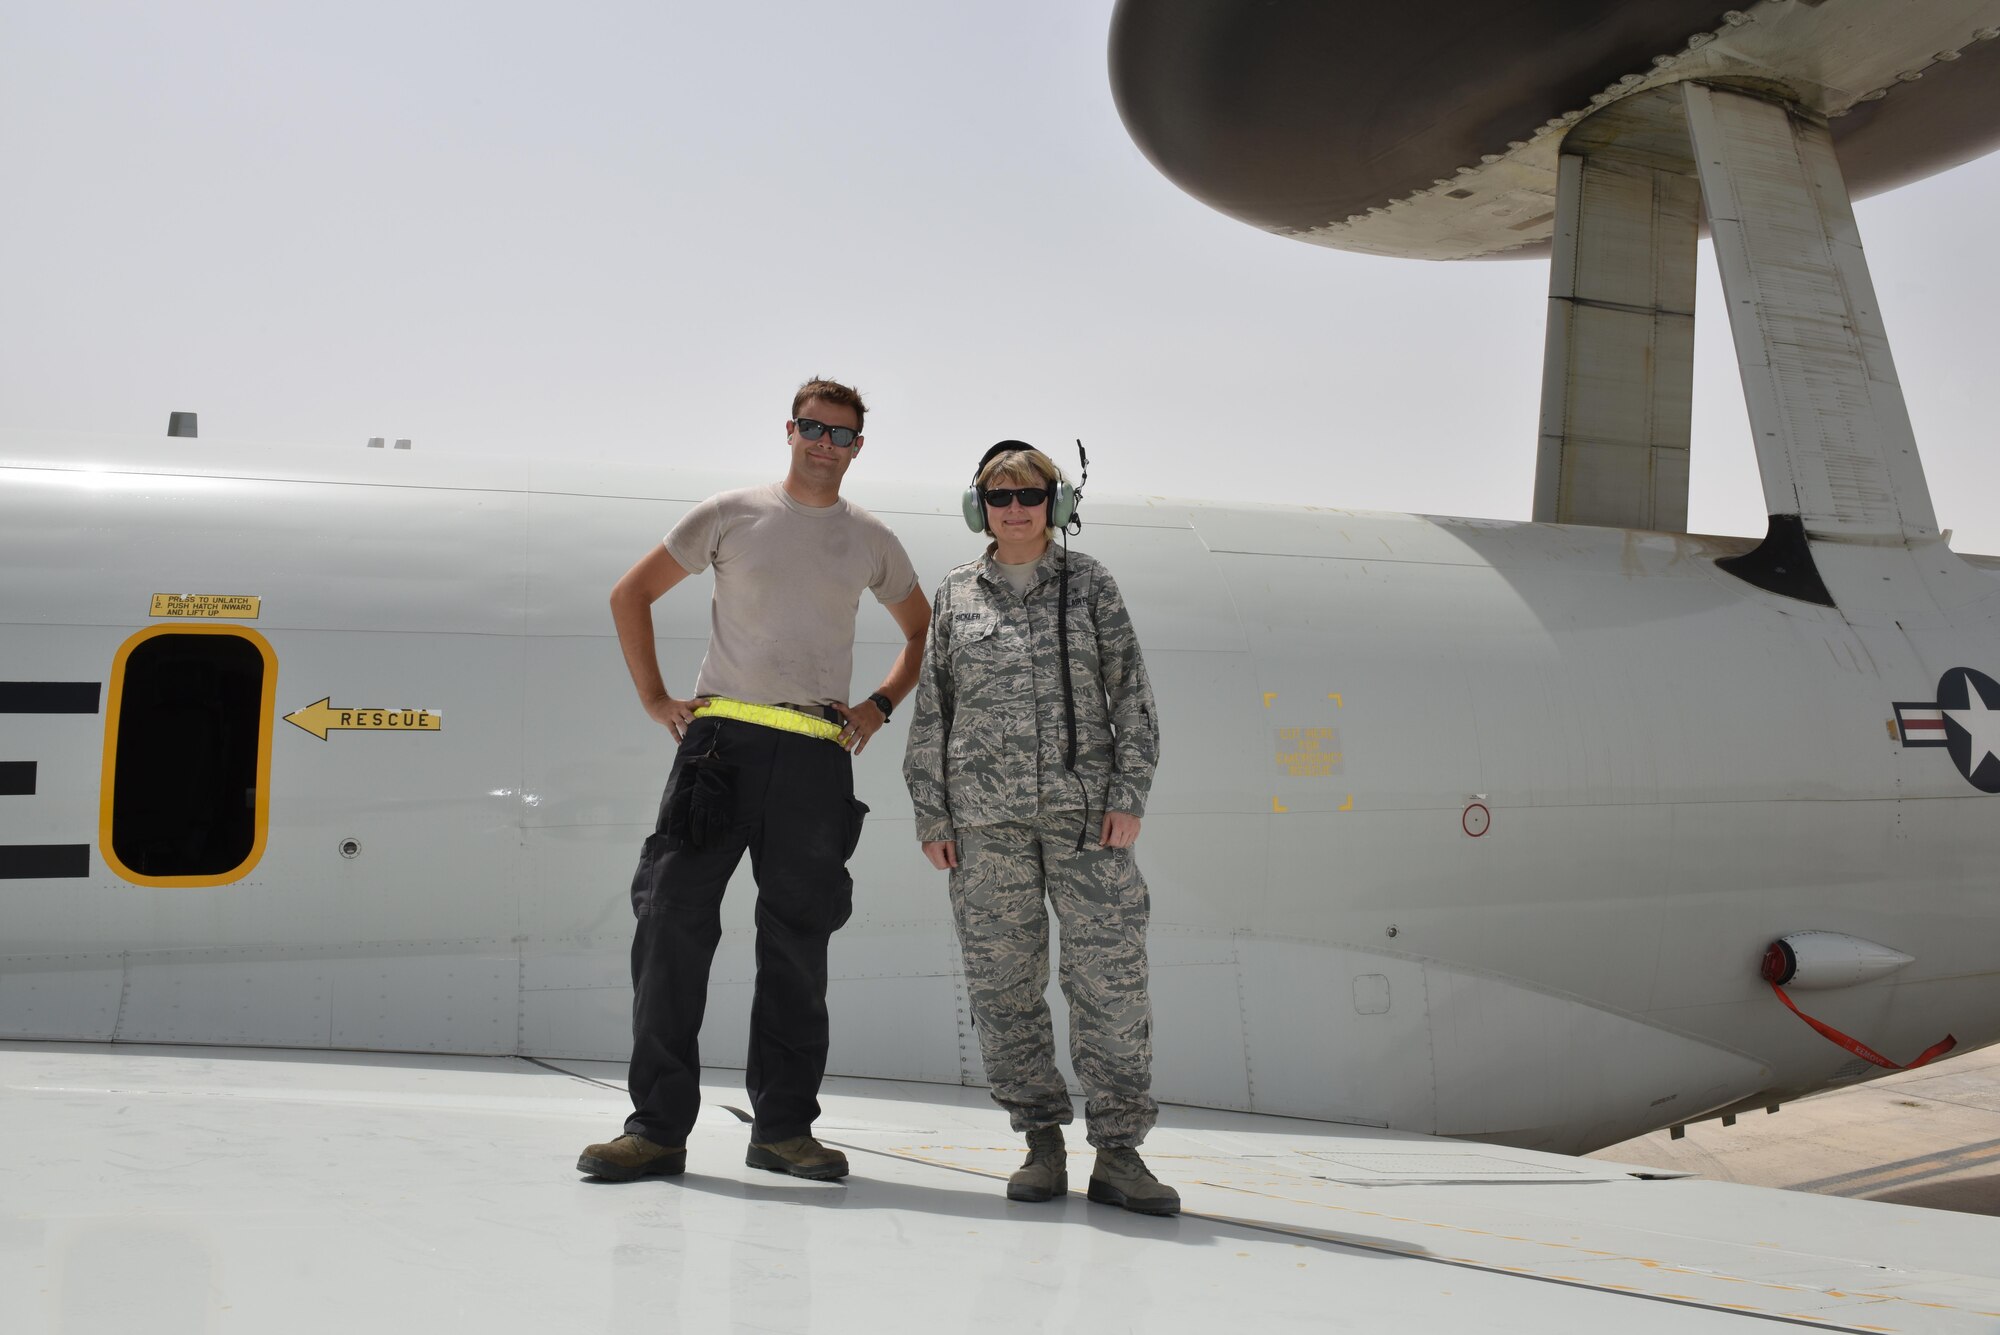 Senior Airman Colt, left, and his mother Maj. Donna, right, stand on the wing of an E-3 Sentry at Al Dhafra Air Base, United Arab Emirates, July 20, 2017. Donna, currently deployed to Al Udeid Air Base, Qatar, coordinated with U.S. Air Forces Central Command and 380th Air Expeditionary Wing leadership to surprise her son. (U.S. Air Force photo by Staff Sgt. Marjorie A. Bowlden)